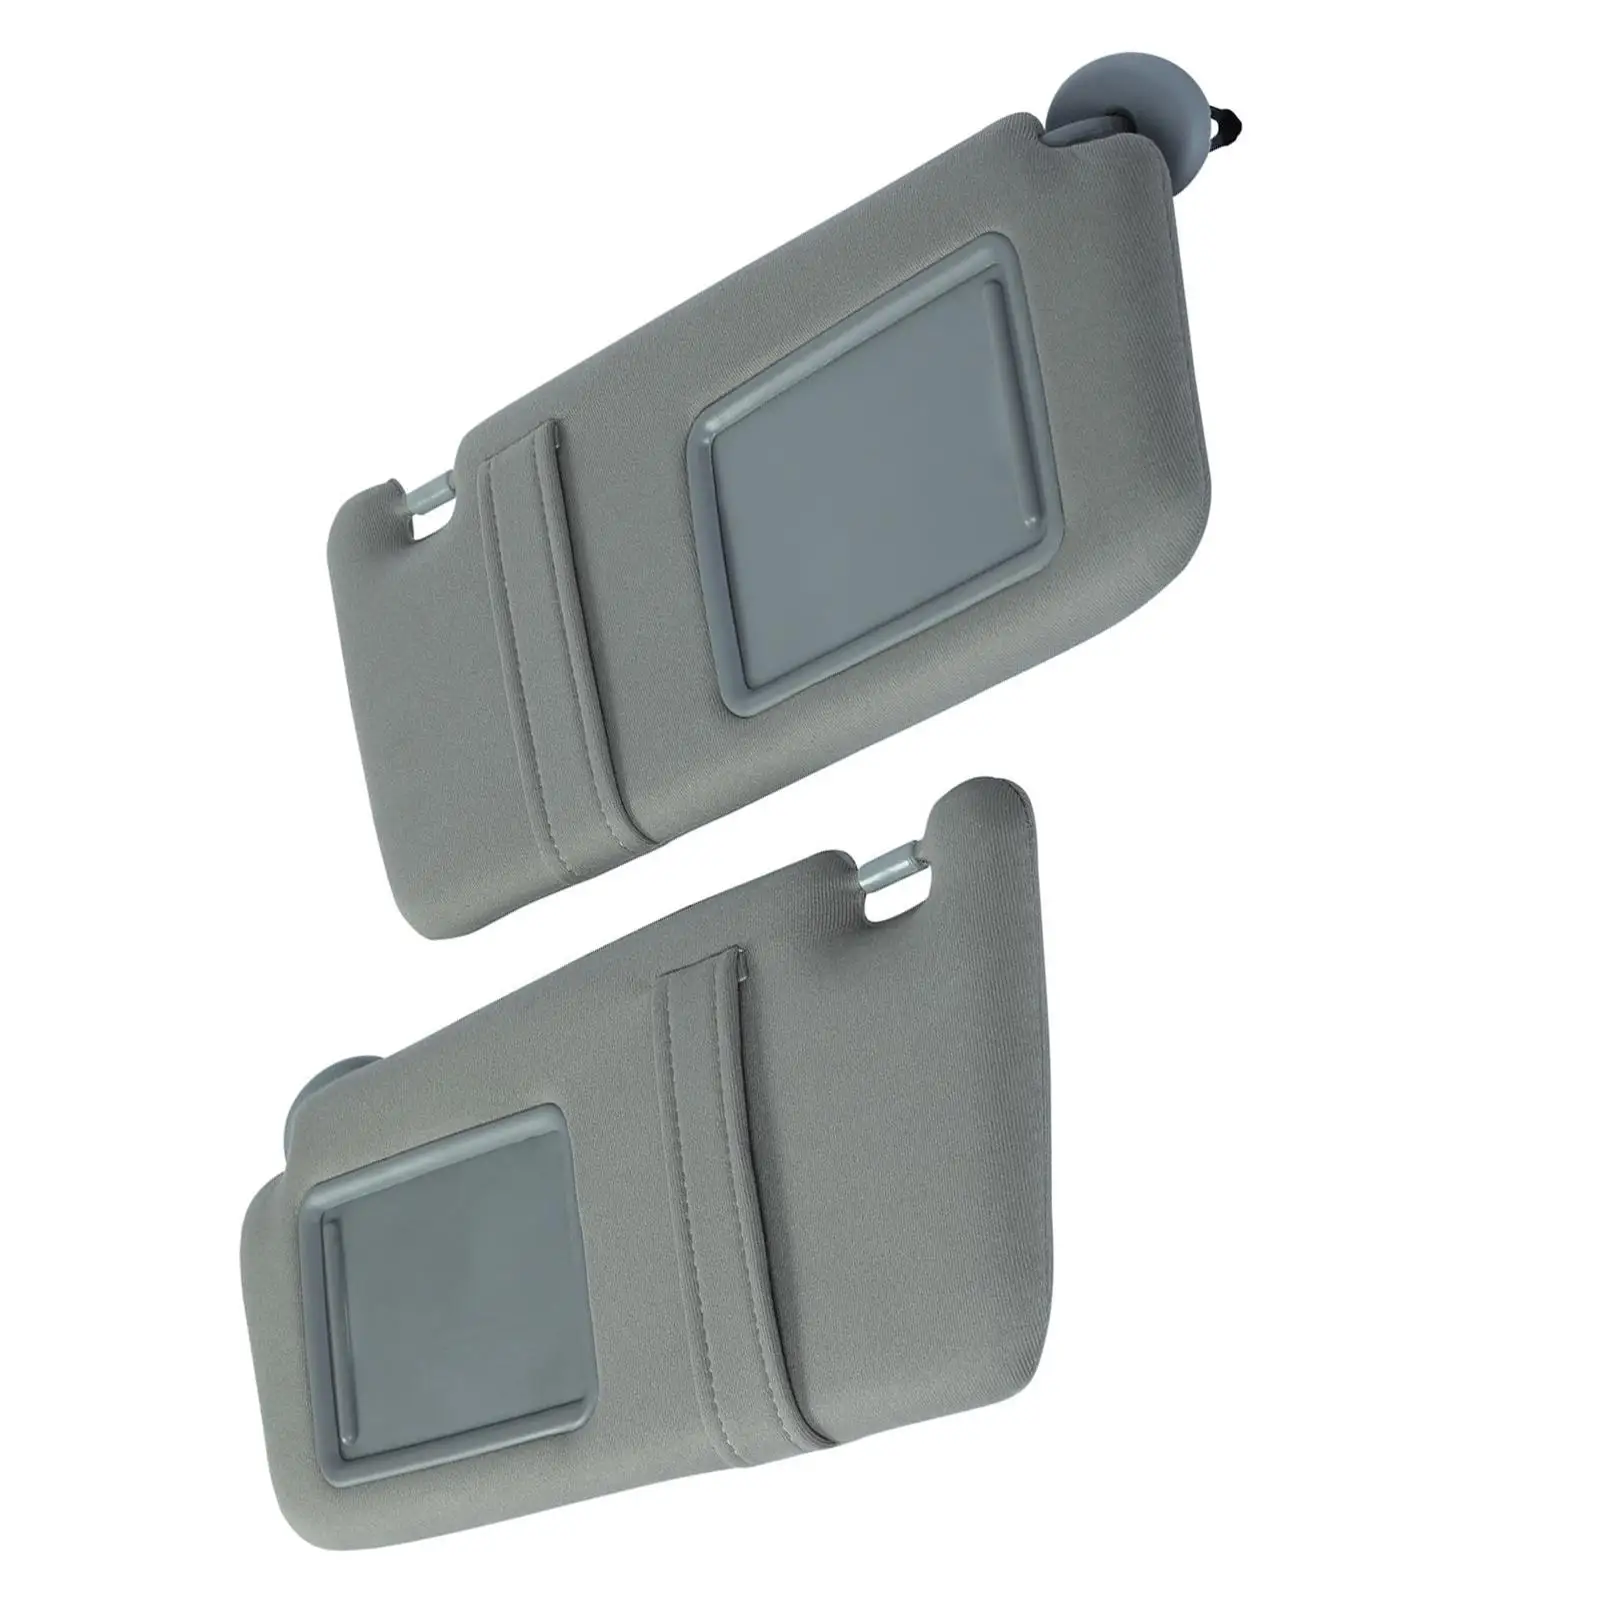 2Pcs Car Sun Visor 74320-06780-b0 74320-33B81-b0 without Sunroof Direct Replaces for Toyota for camry 2007 2008 2009 2010 2011